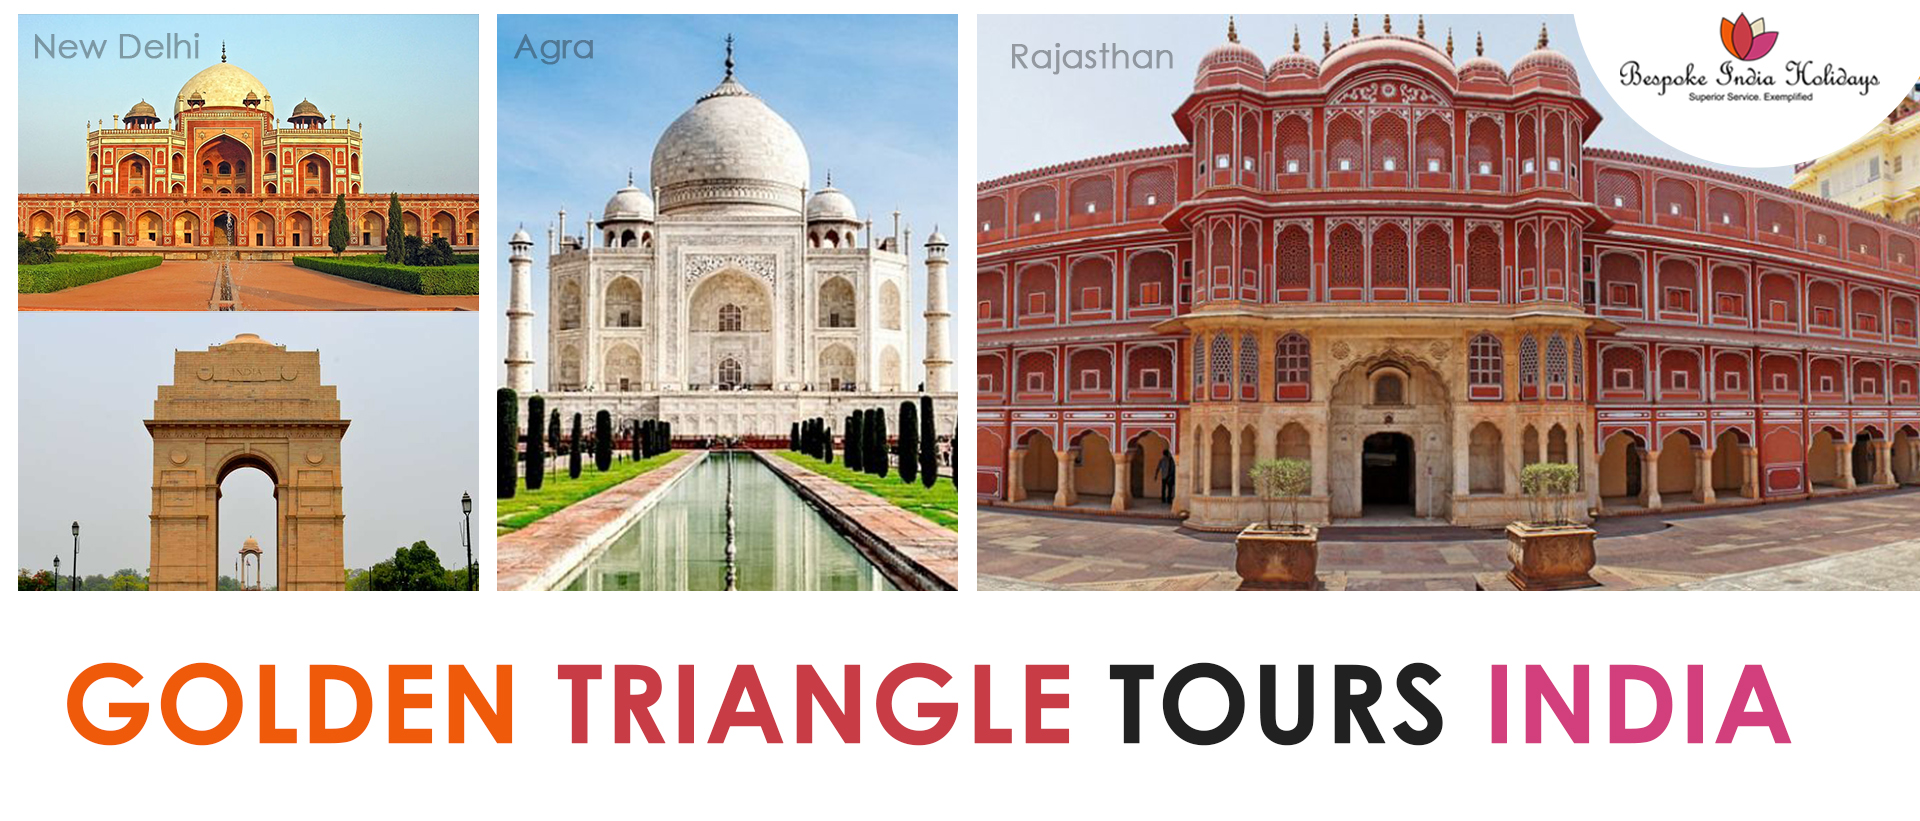 book 5* luxury golden triangle tours india | package at affordable price- bespokeindiaholidays